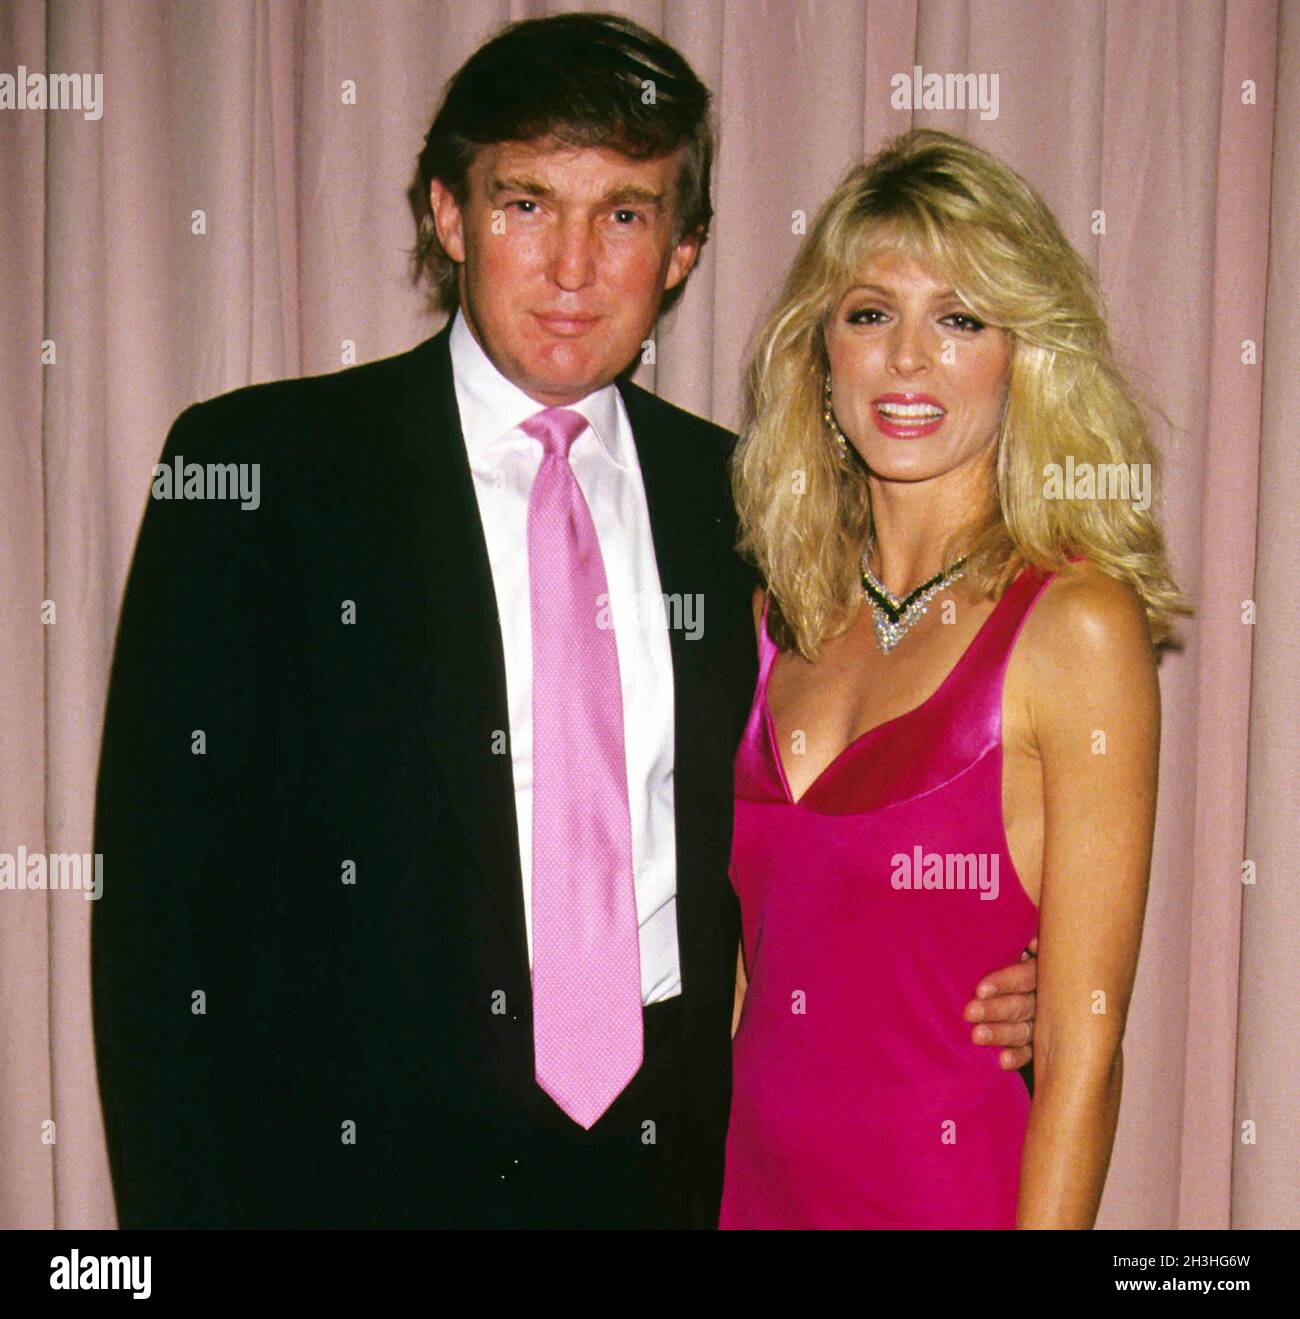 Donald Trump Marla Maples 1991Photo by Adam Scull/PHOTOlink / MediaPunch Stock Photo